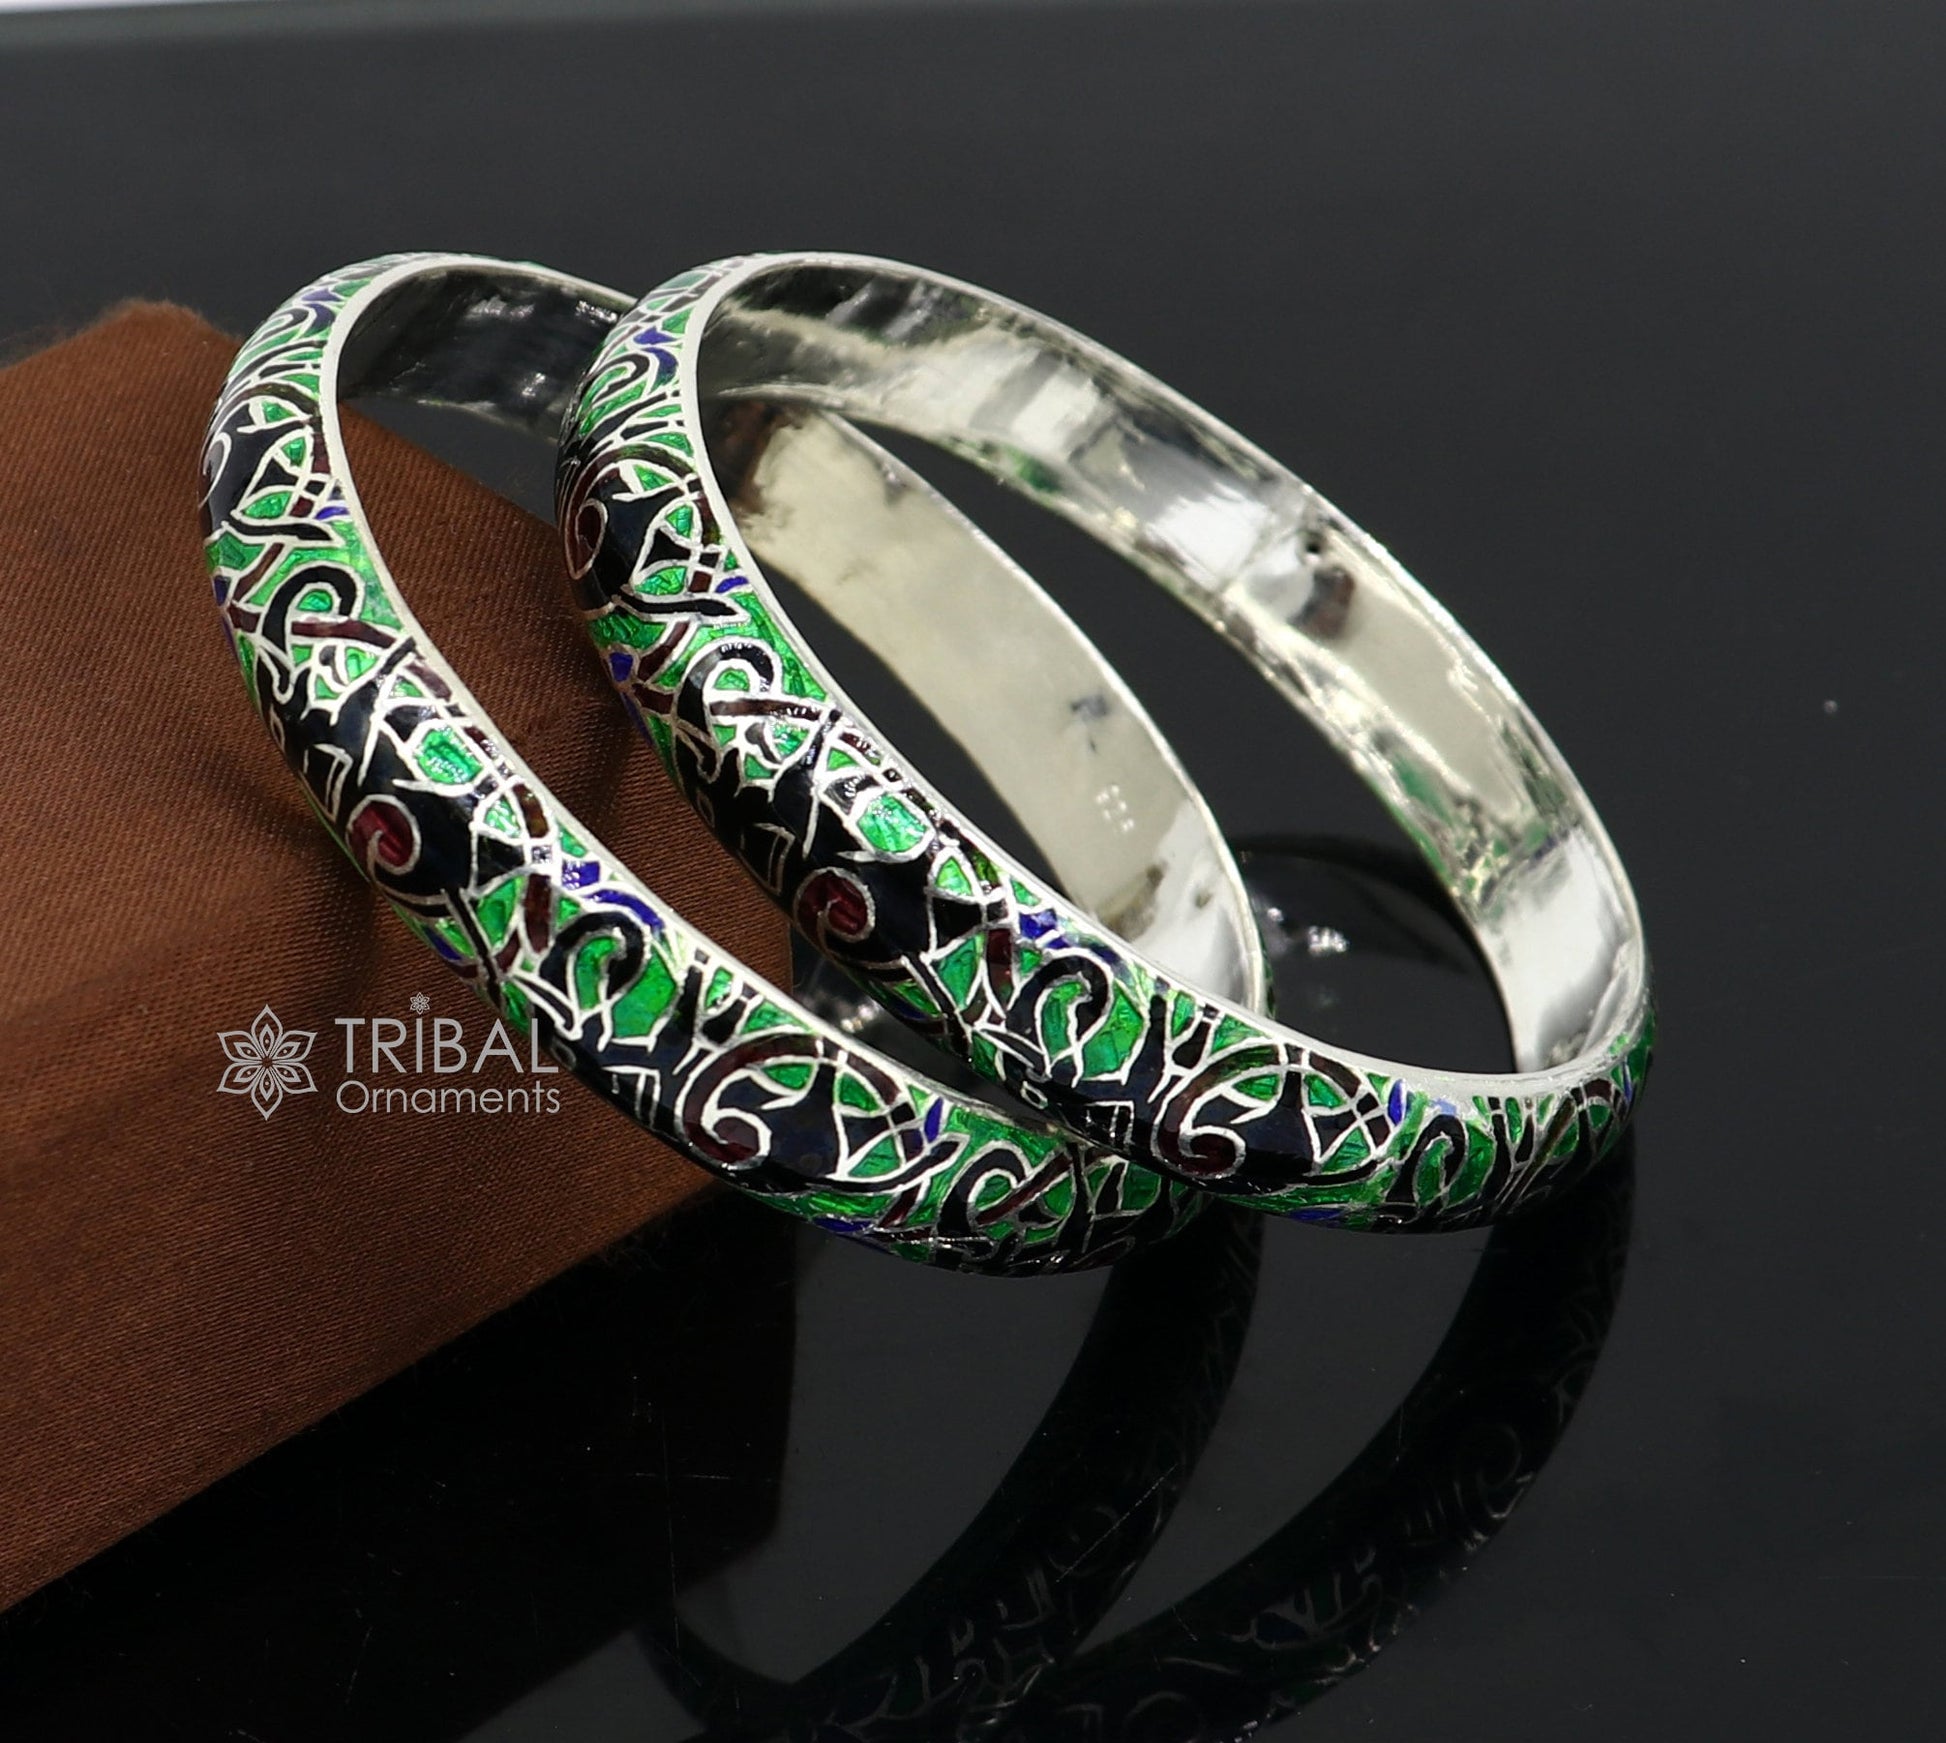 925 Sterling silver handmade amazing meenakari (color enamel )bangle bracelet elephant design Cultral trendy style jewelry from india nba356 - TRIBAL ORNAMENTS